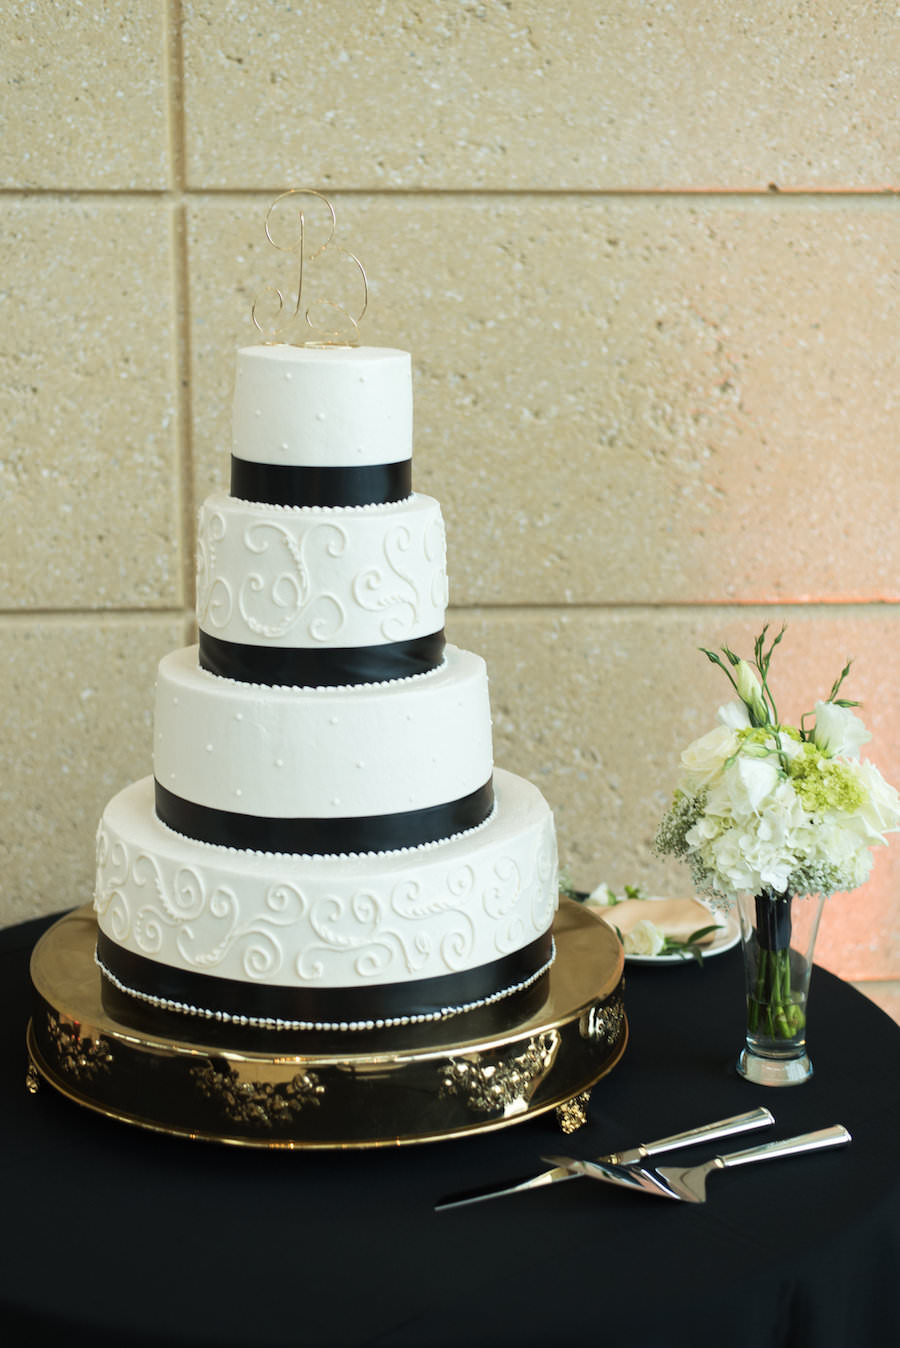 Four Tier Round White Wedding Cake with Black Satin Ribbon Bands on Gold Cake Stand | Photography by Caroline and Evan Photography